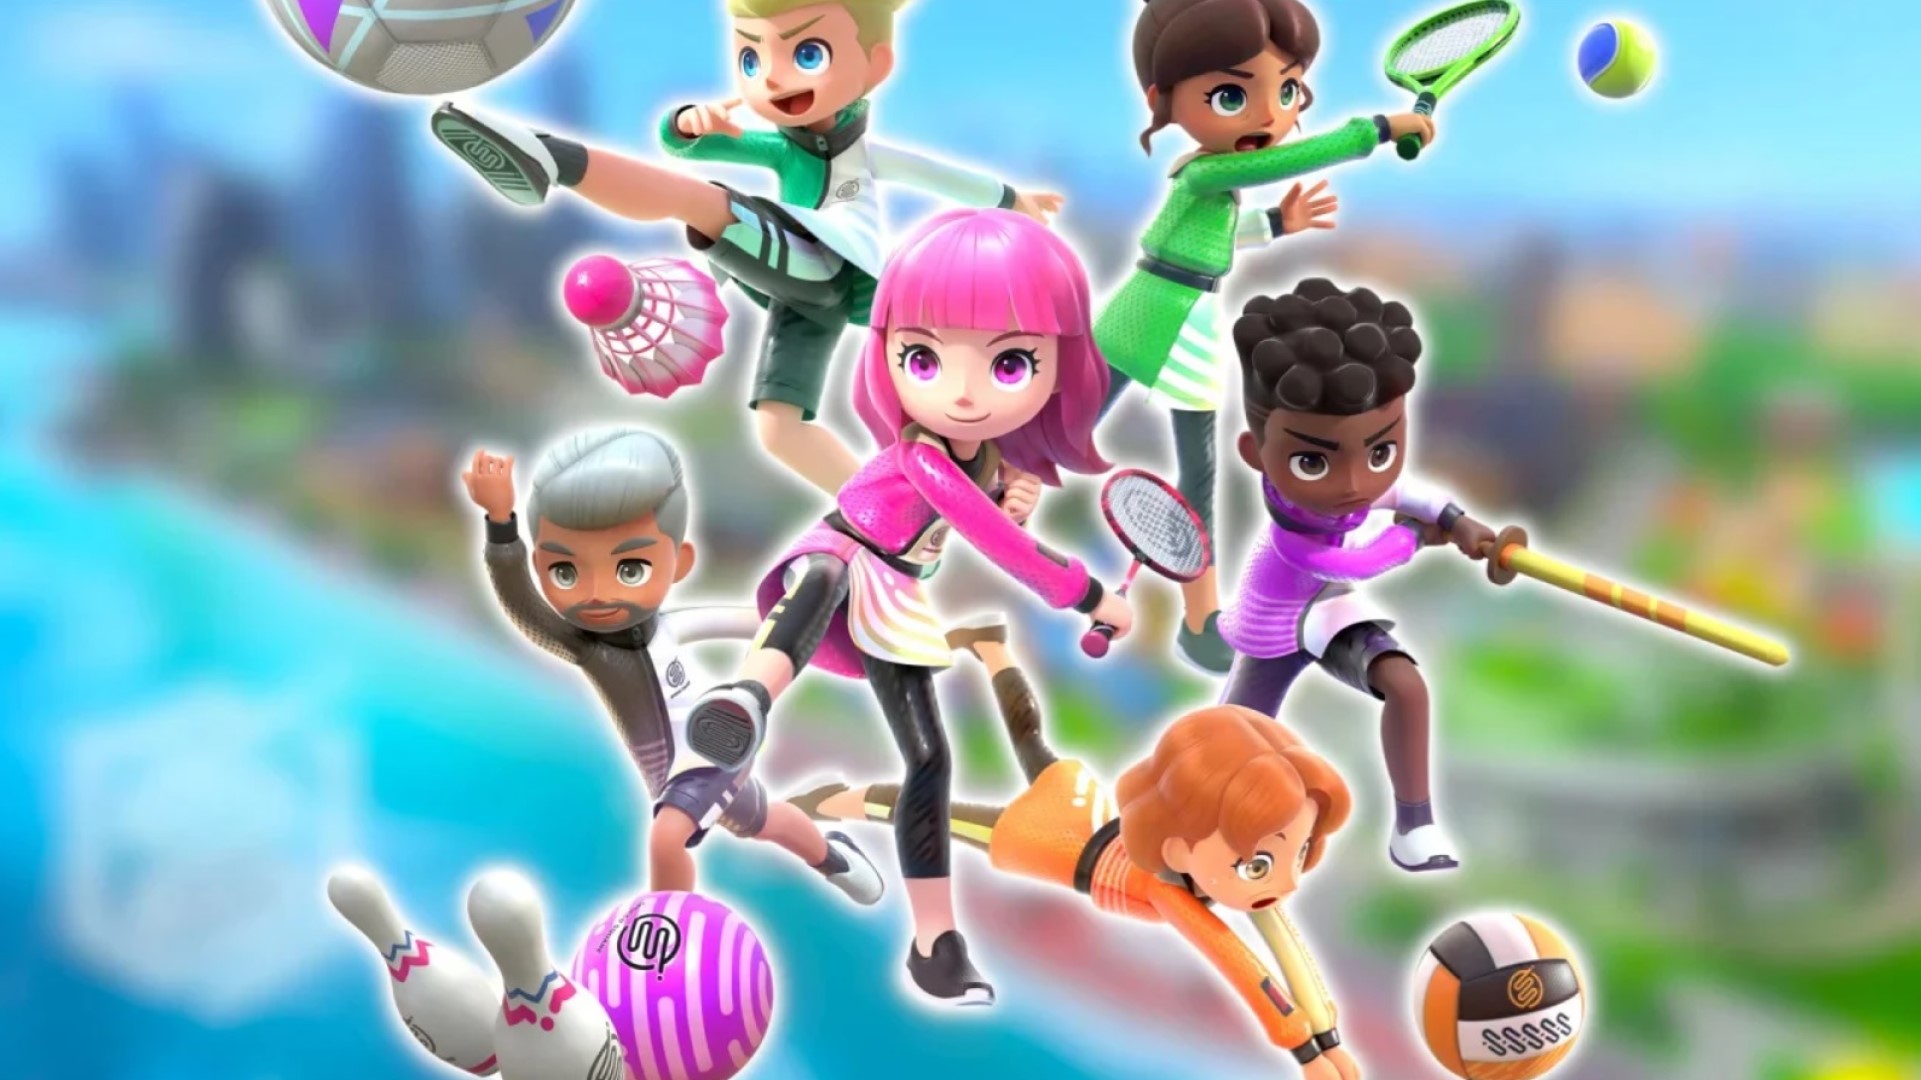 Nintendo Switch Sports is Out Now, Launch Trailer Revealed